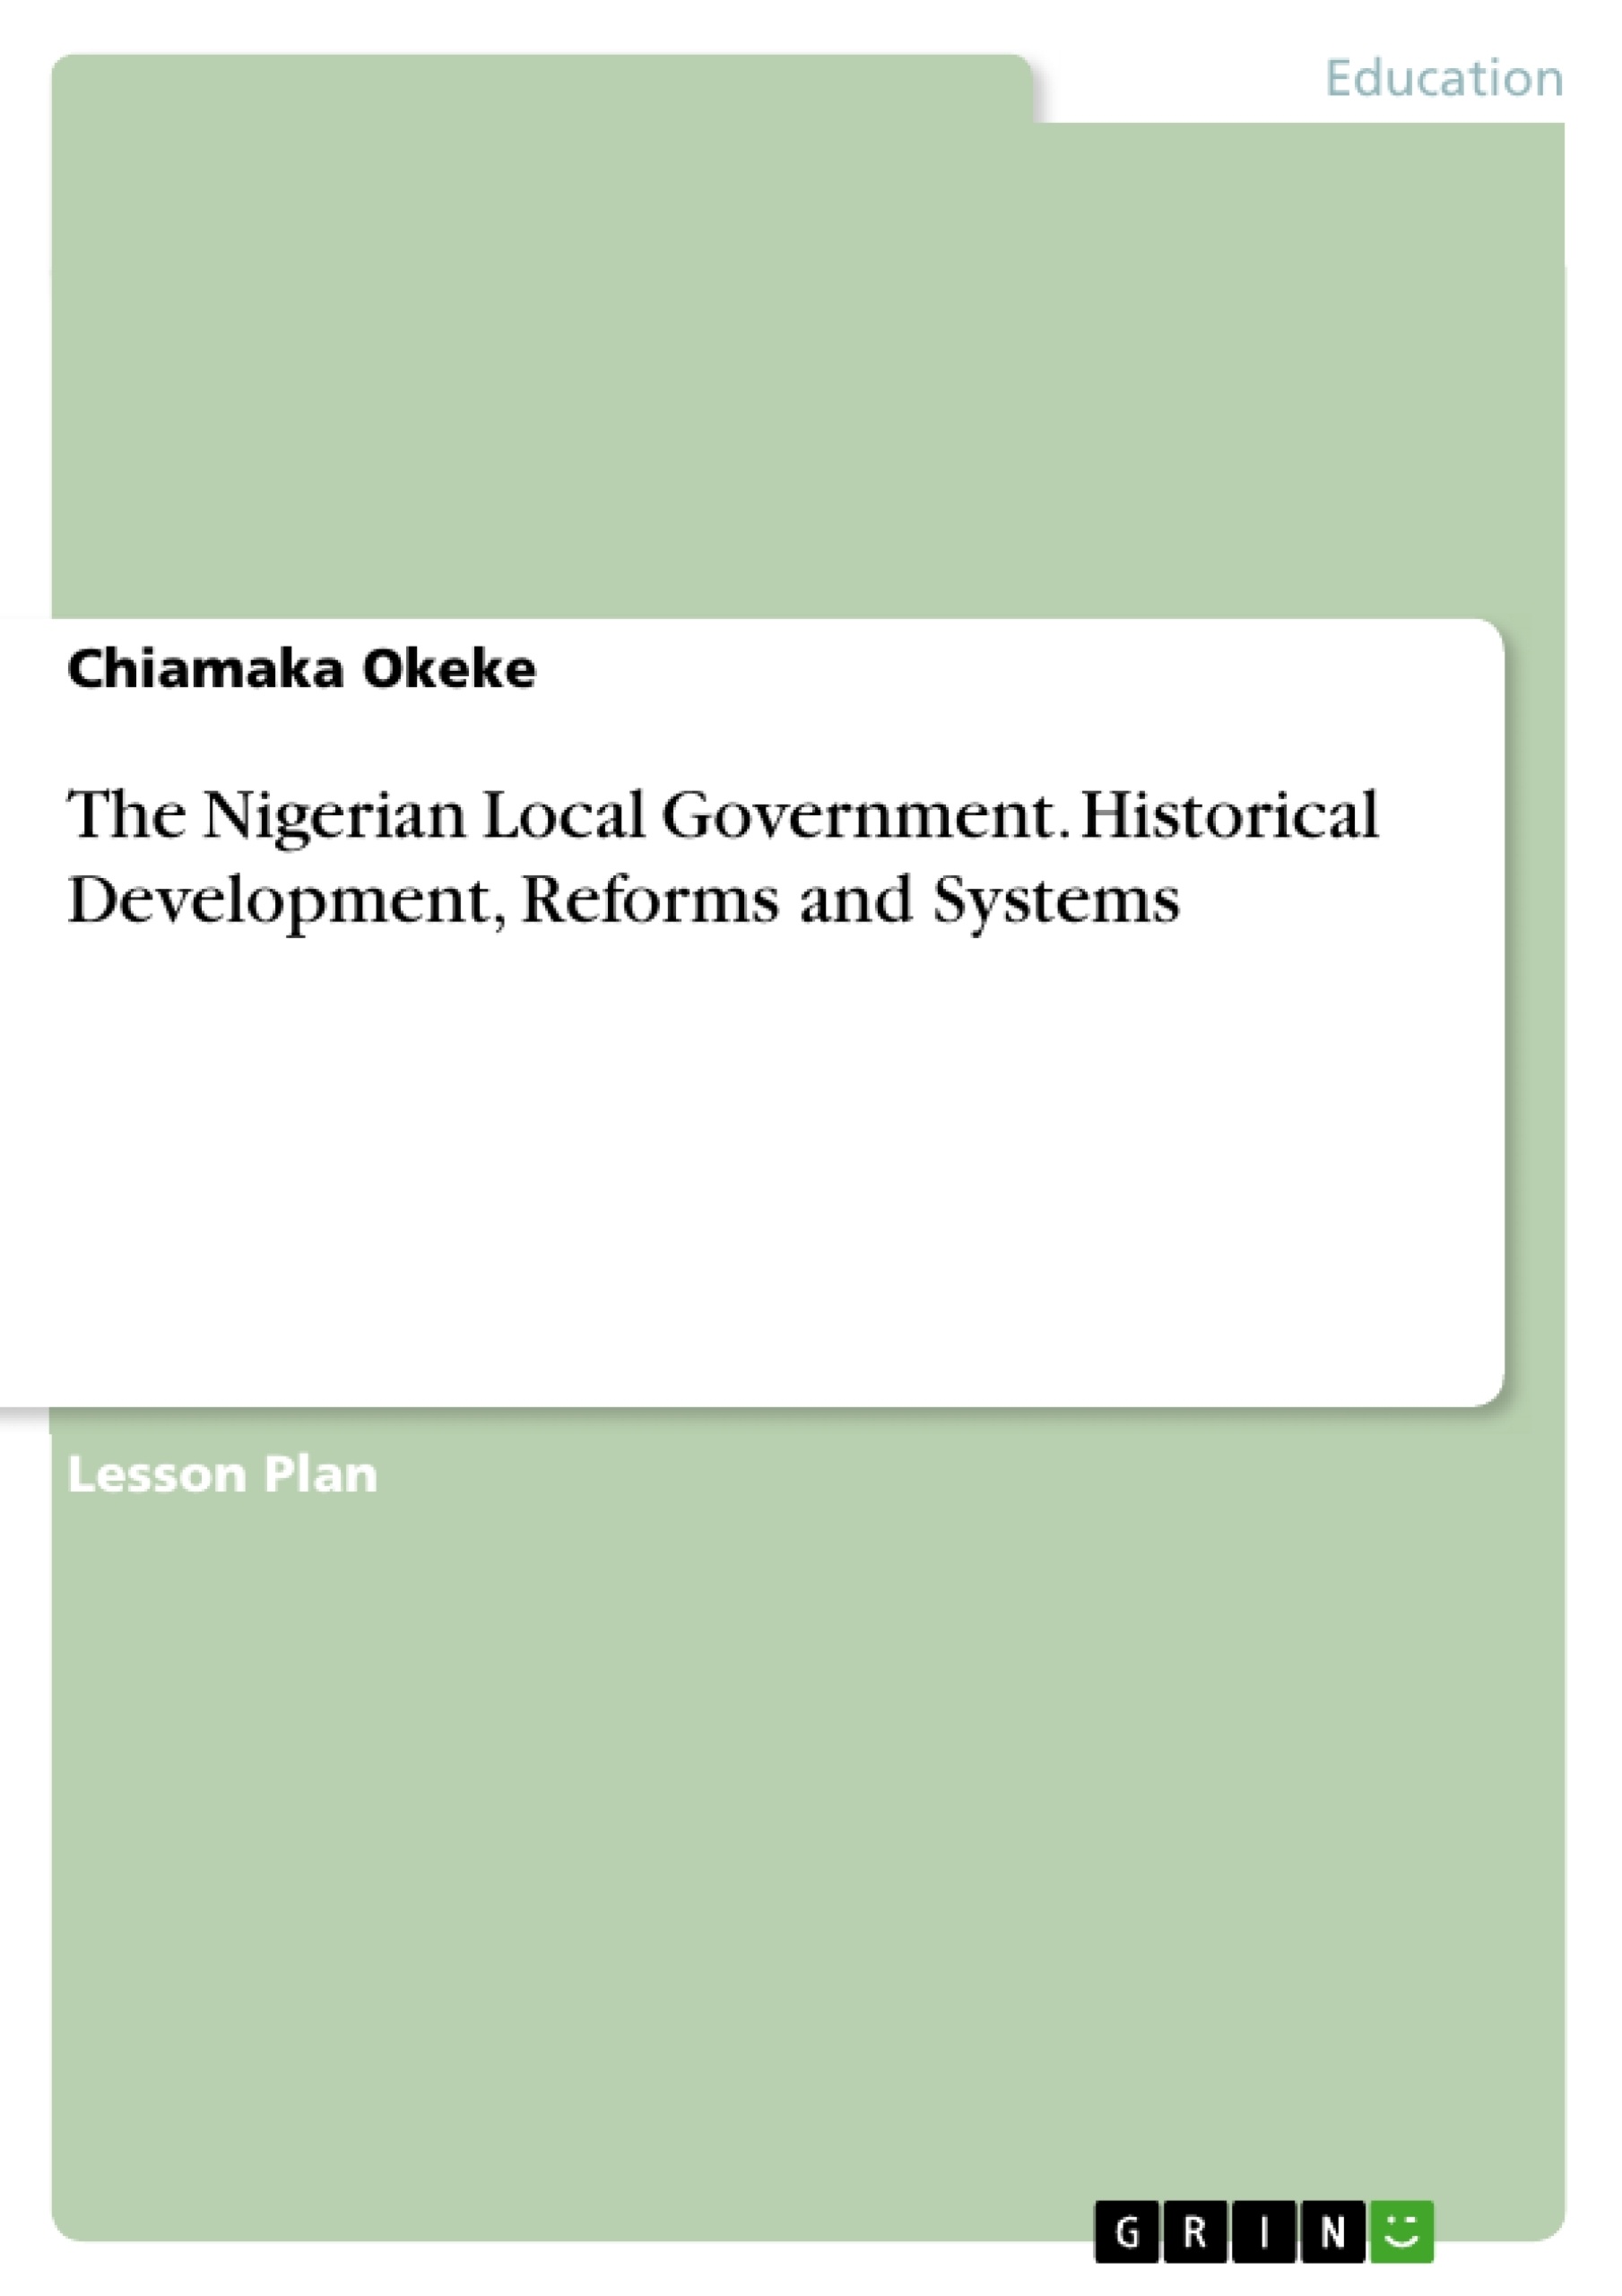 Title: The Nigerian Local Government. Historical Development, Reforms and Systems